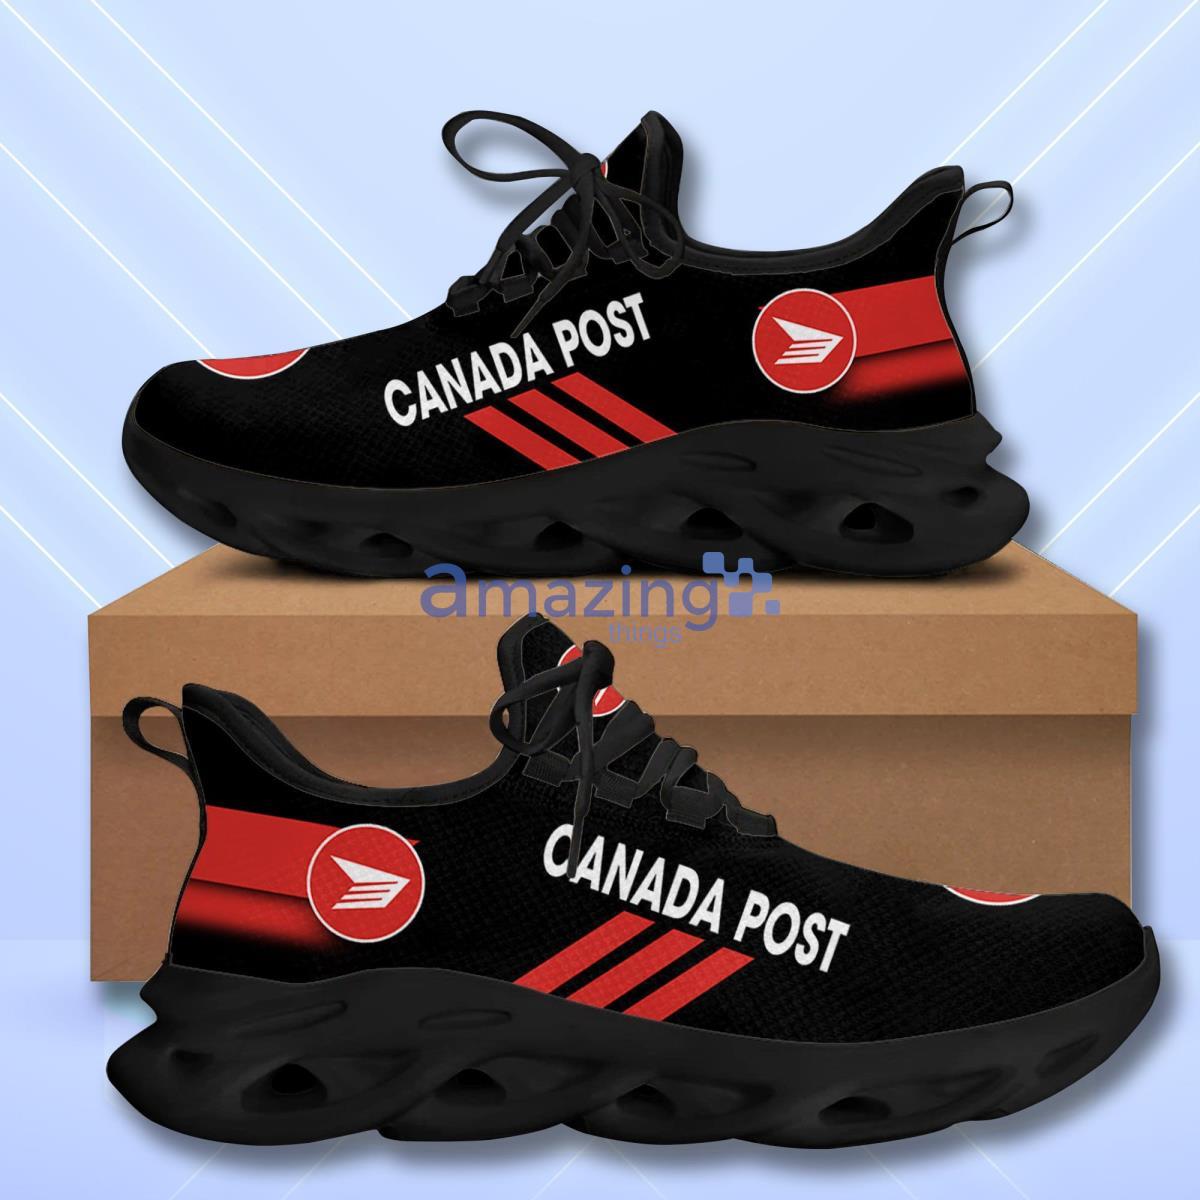 Canada Post Max Soul Shoes Hot Trending Gift For Men Women Product Photo 1